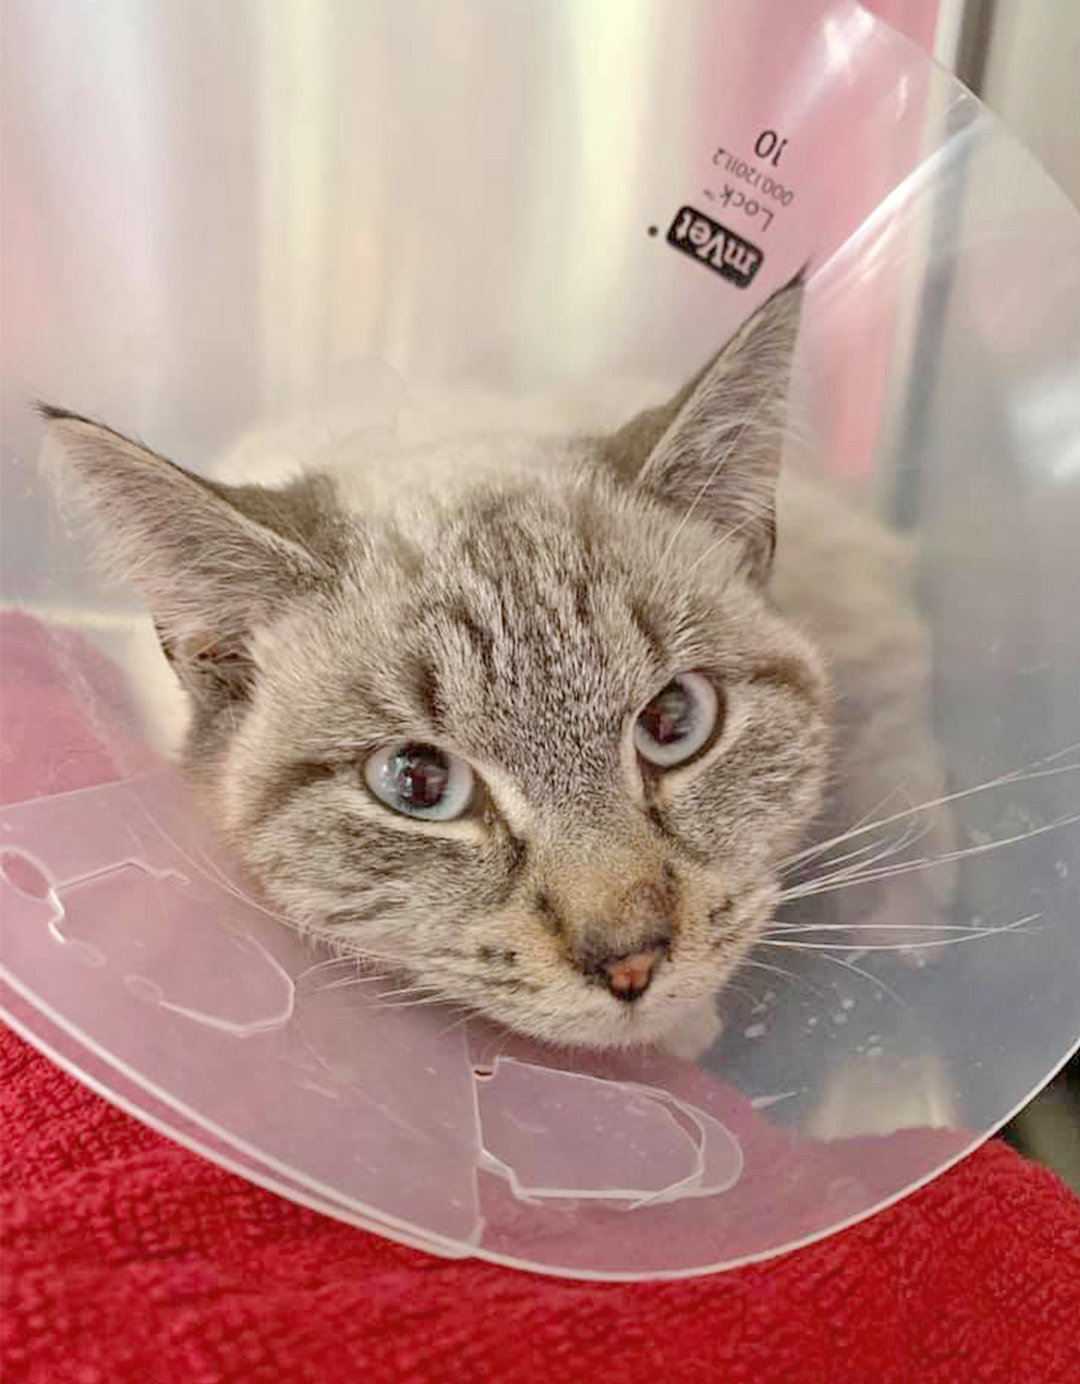 RECUPERATING — “Lucky” the cat gets some rest and recuperation after being hit by a car and adopted Jayden, Rattray, 11, of  Camden.